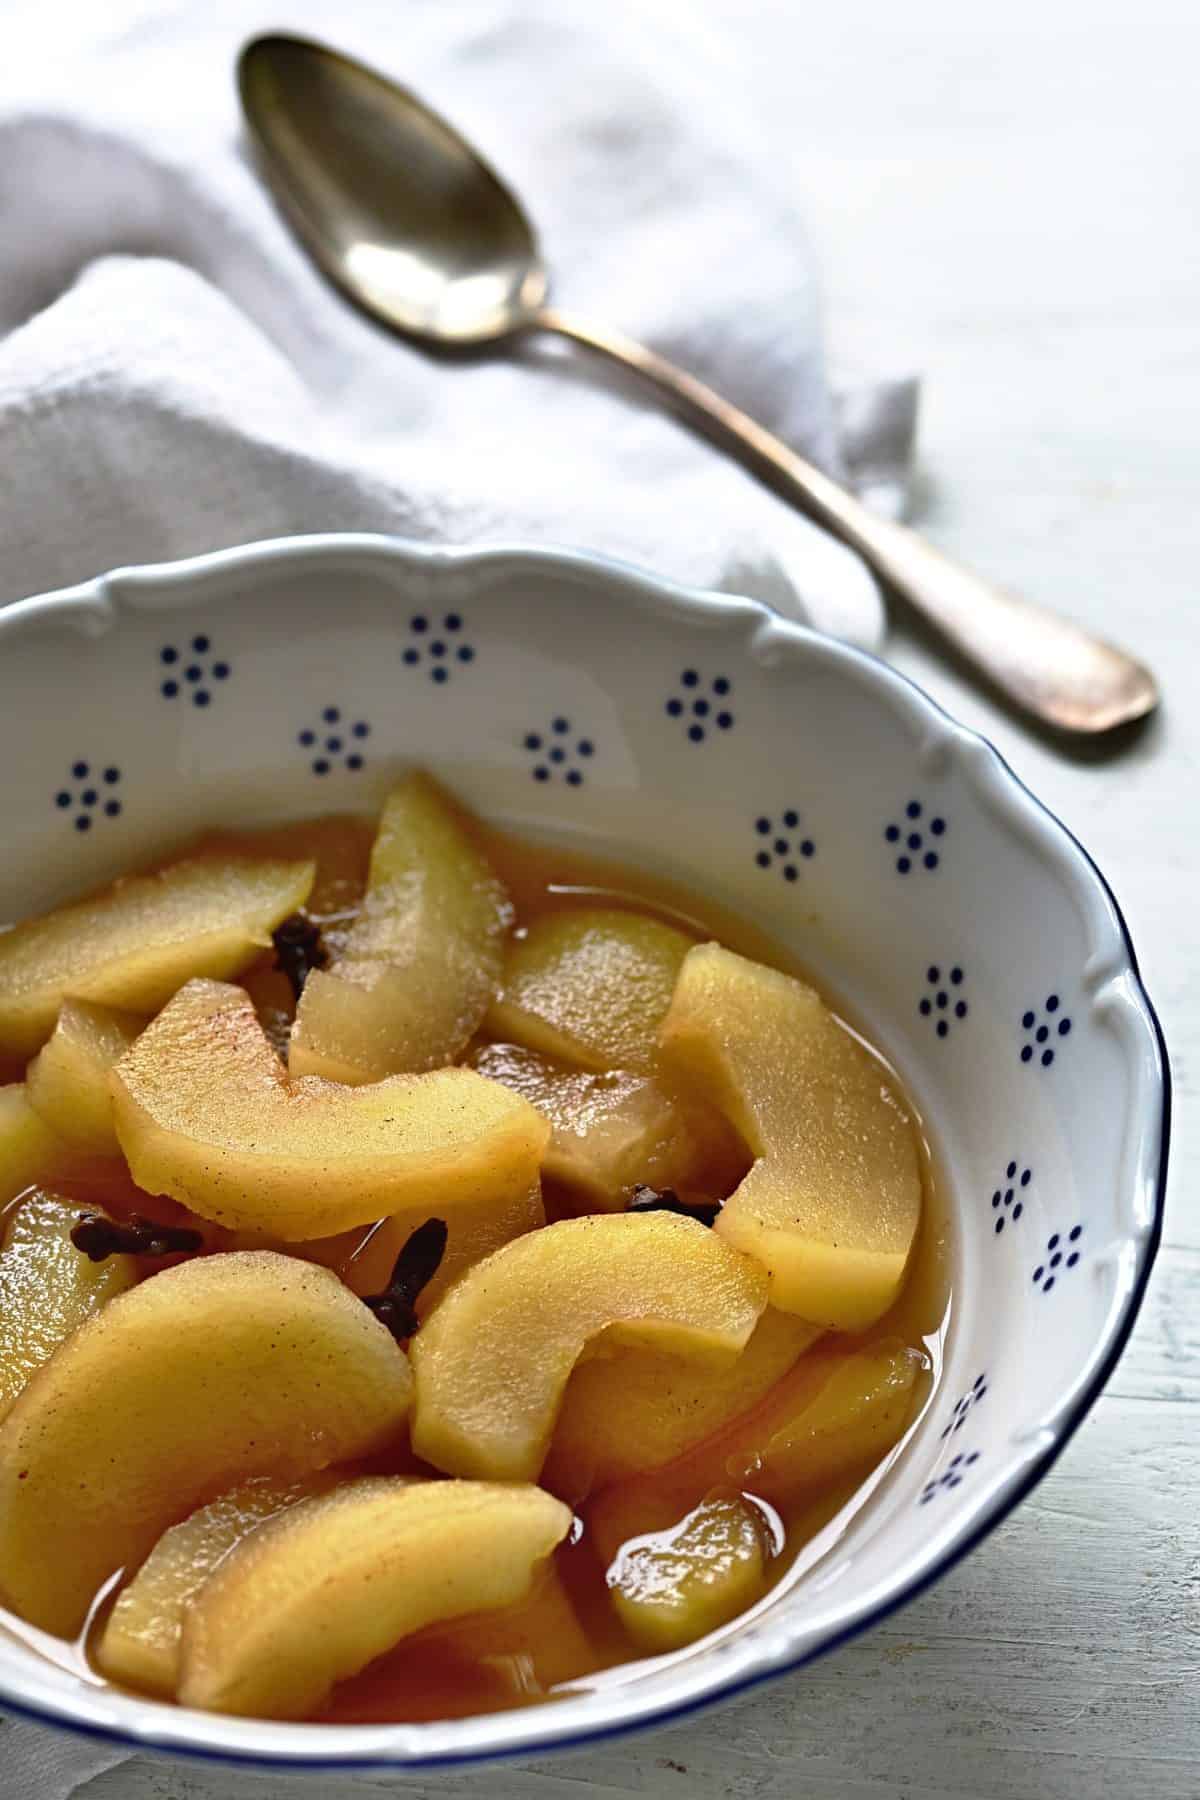 Spiced apple compote served warm in a bowl with a spoon.